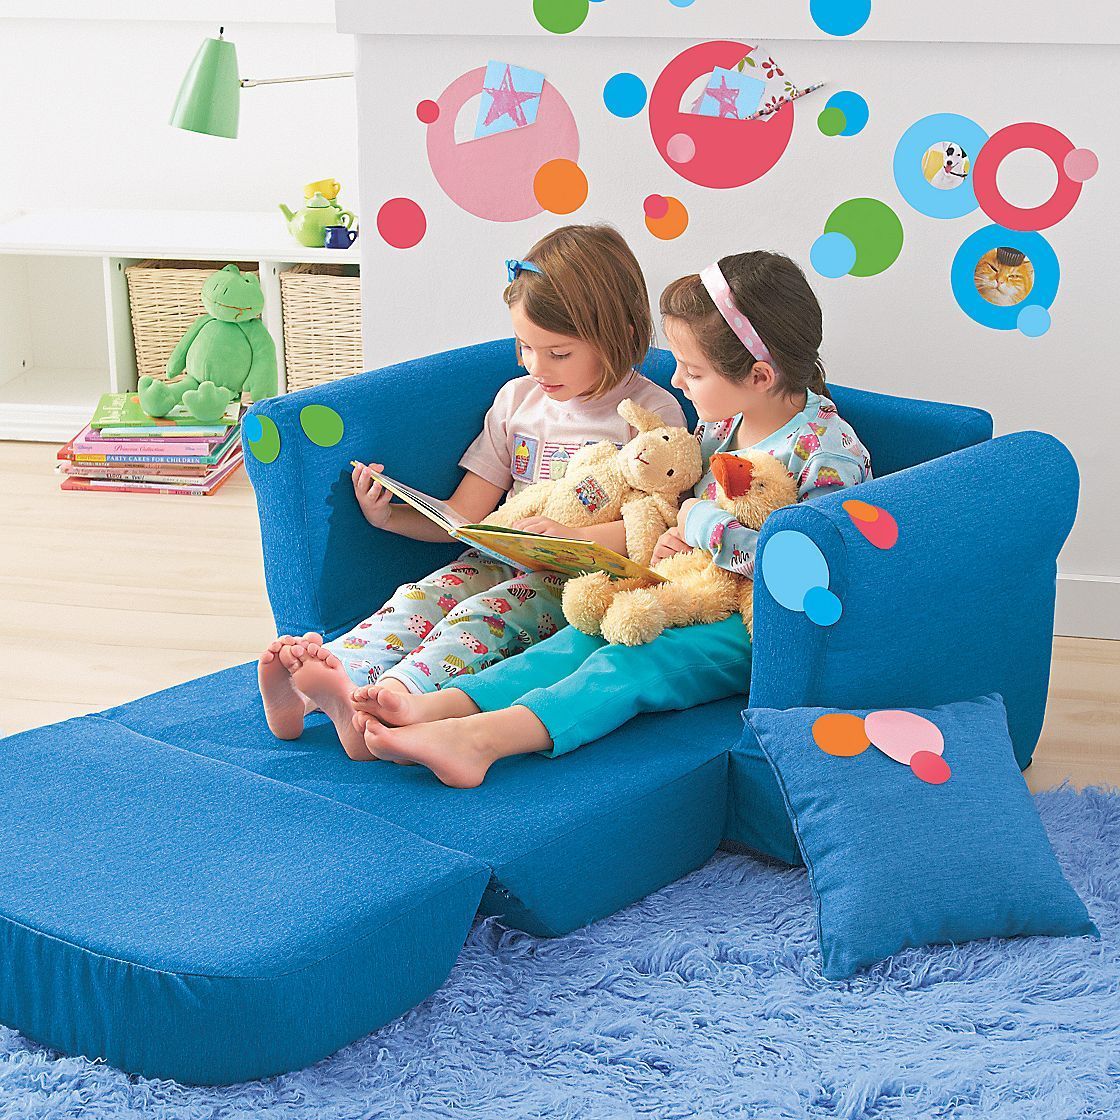 Sites Tcs Site | Kids Sofa, Kids Playroom, Kid Room Decor With Children's Sofa Beds (Gallery 13 of 20)